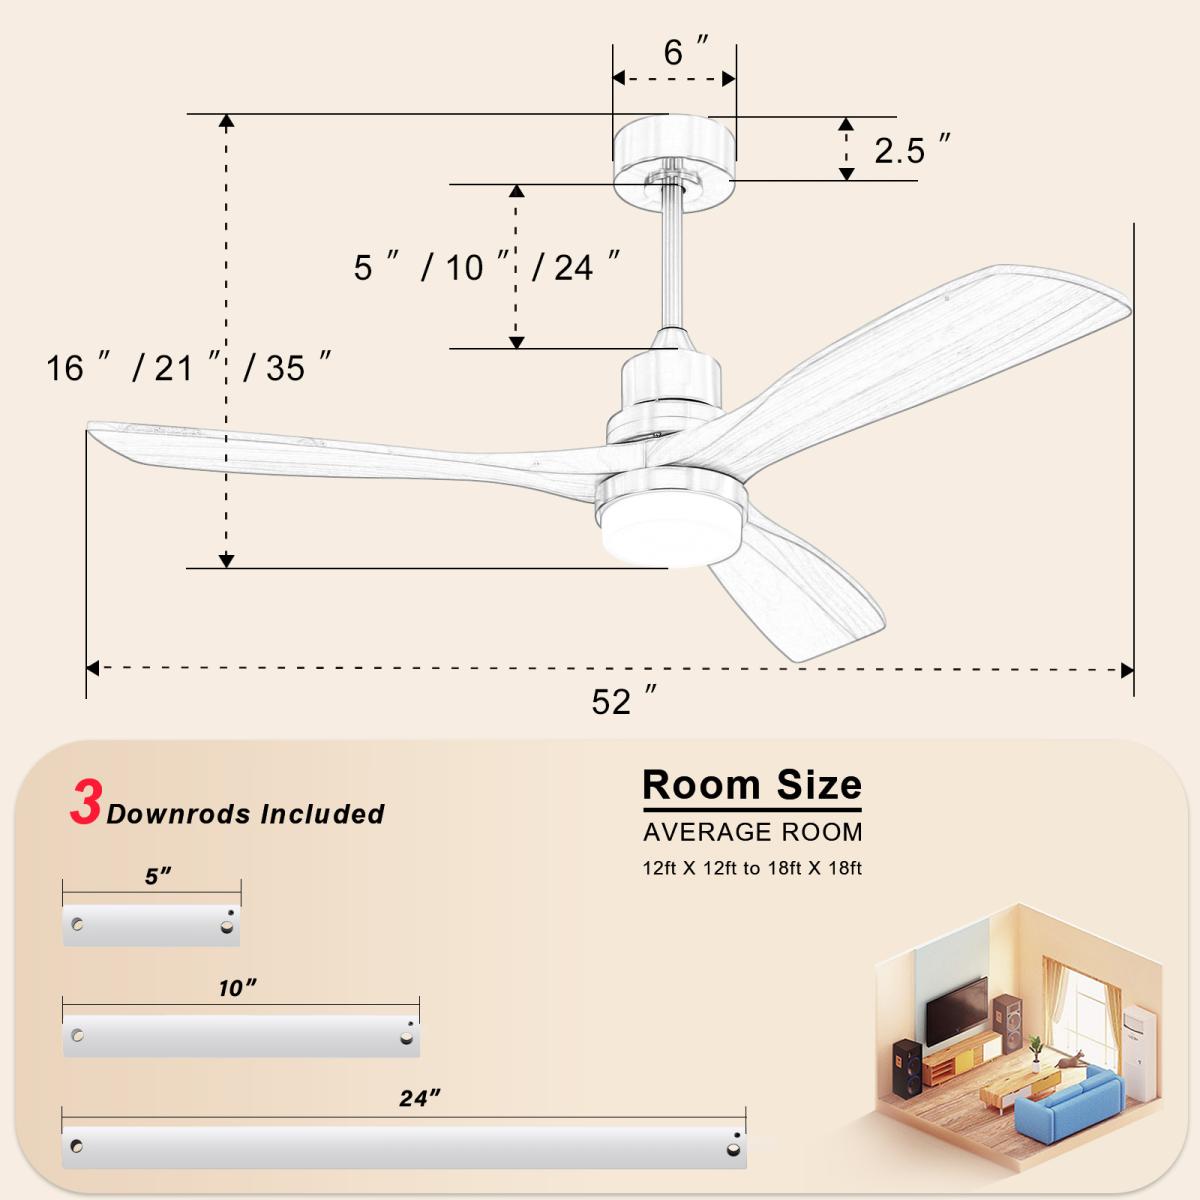 Indoor 52 Inch Ceiling Fan With Dimmable Led Light 6 Speed Remote 3 Wood Blade Reversible Dc Motor For Bedroom